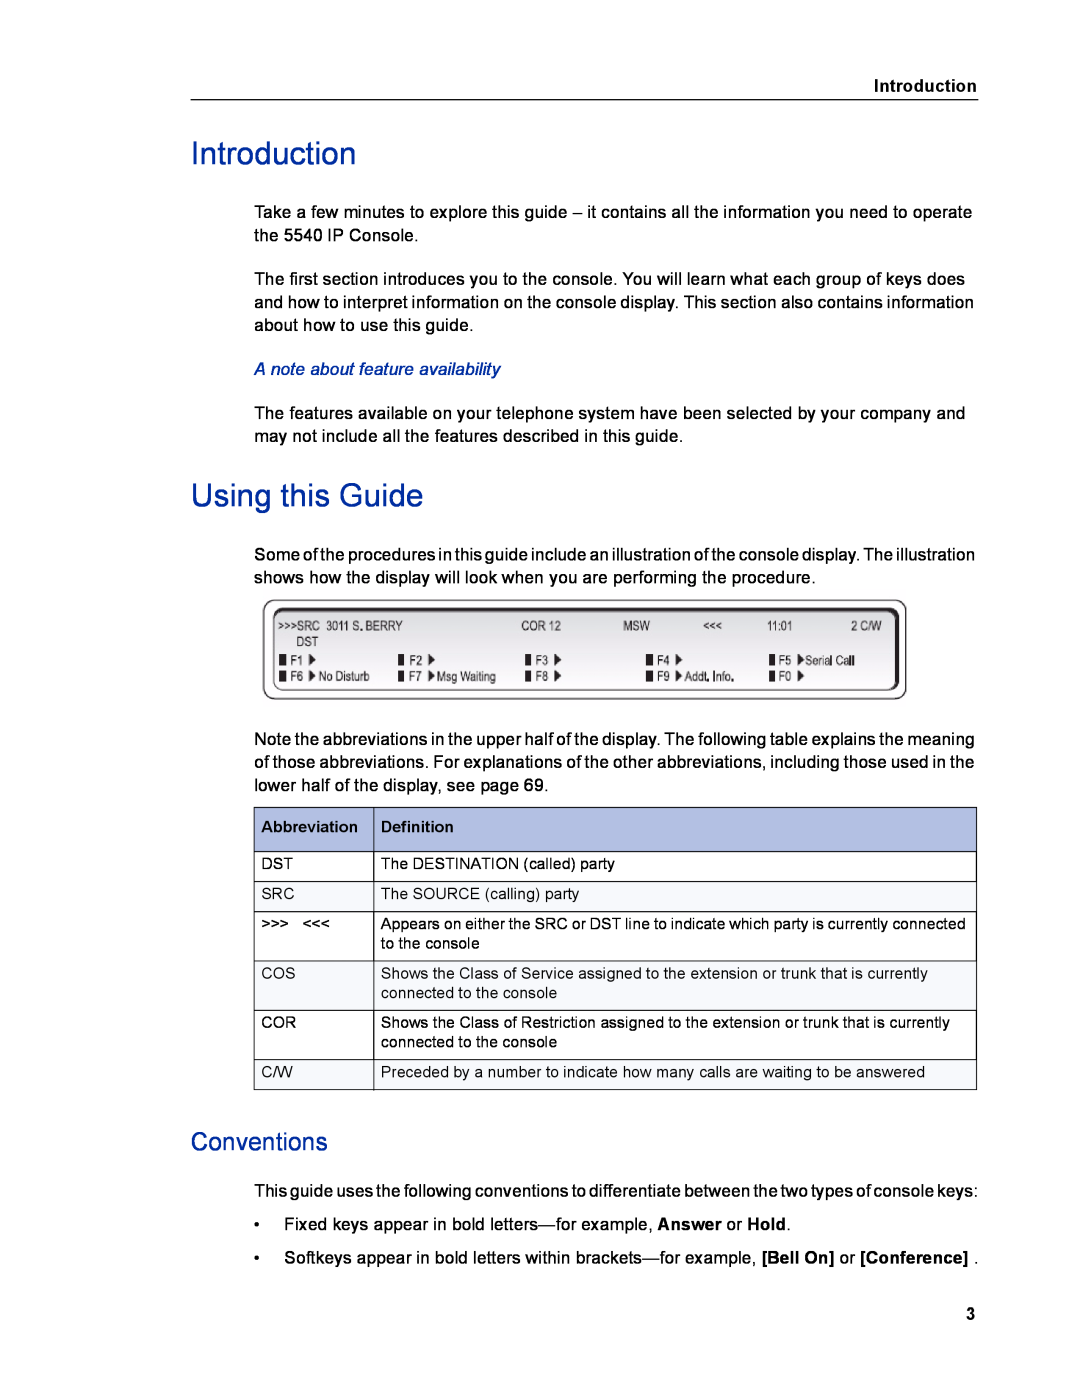 Mitel 5540 manual Introduction, Using this Guide, Conventions 